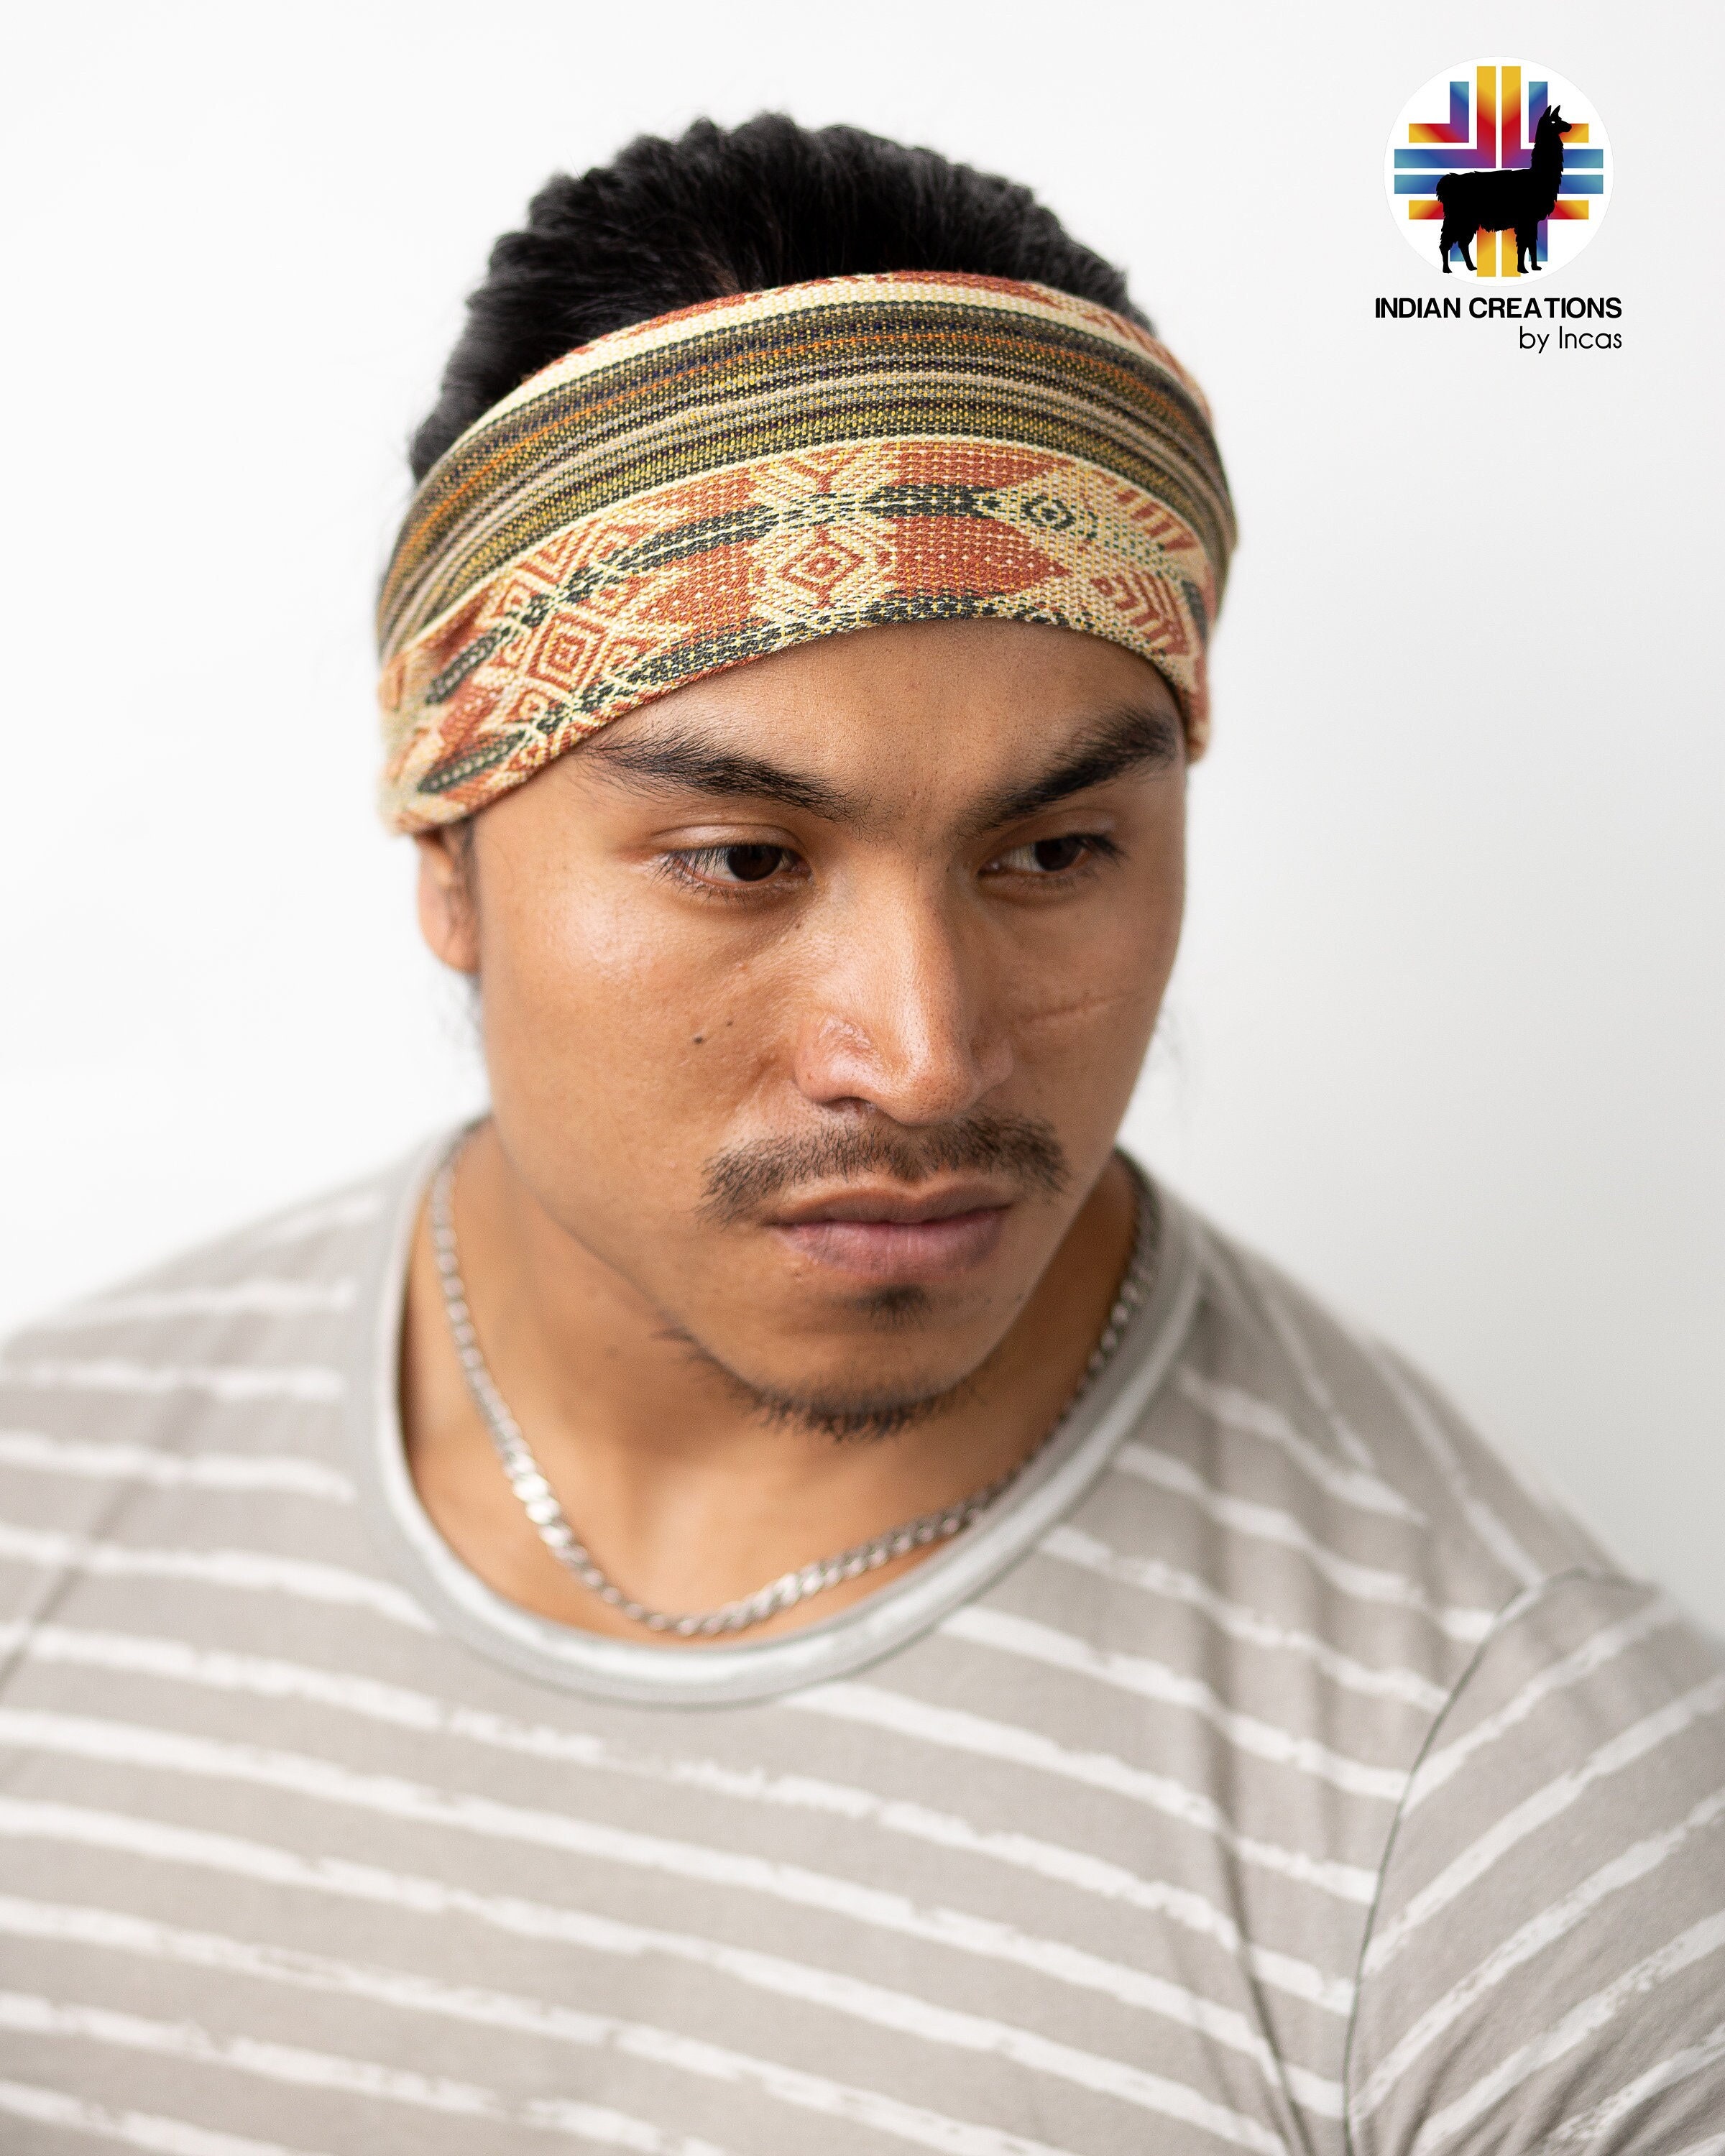 Headband Men, Shop The Largest Collection